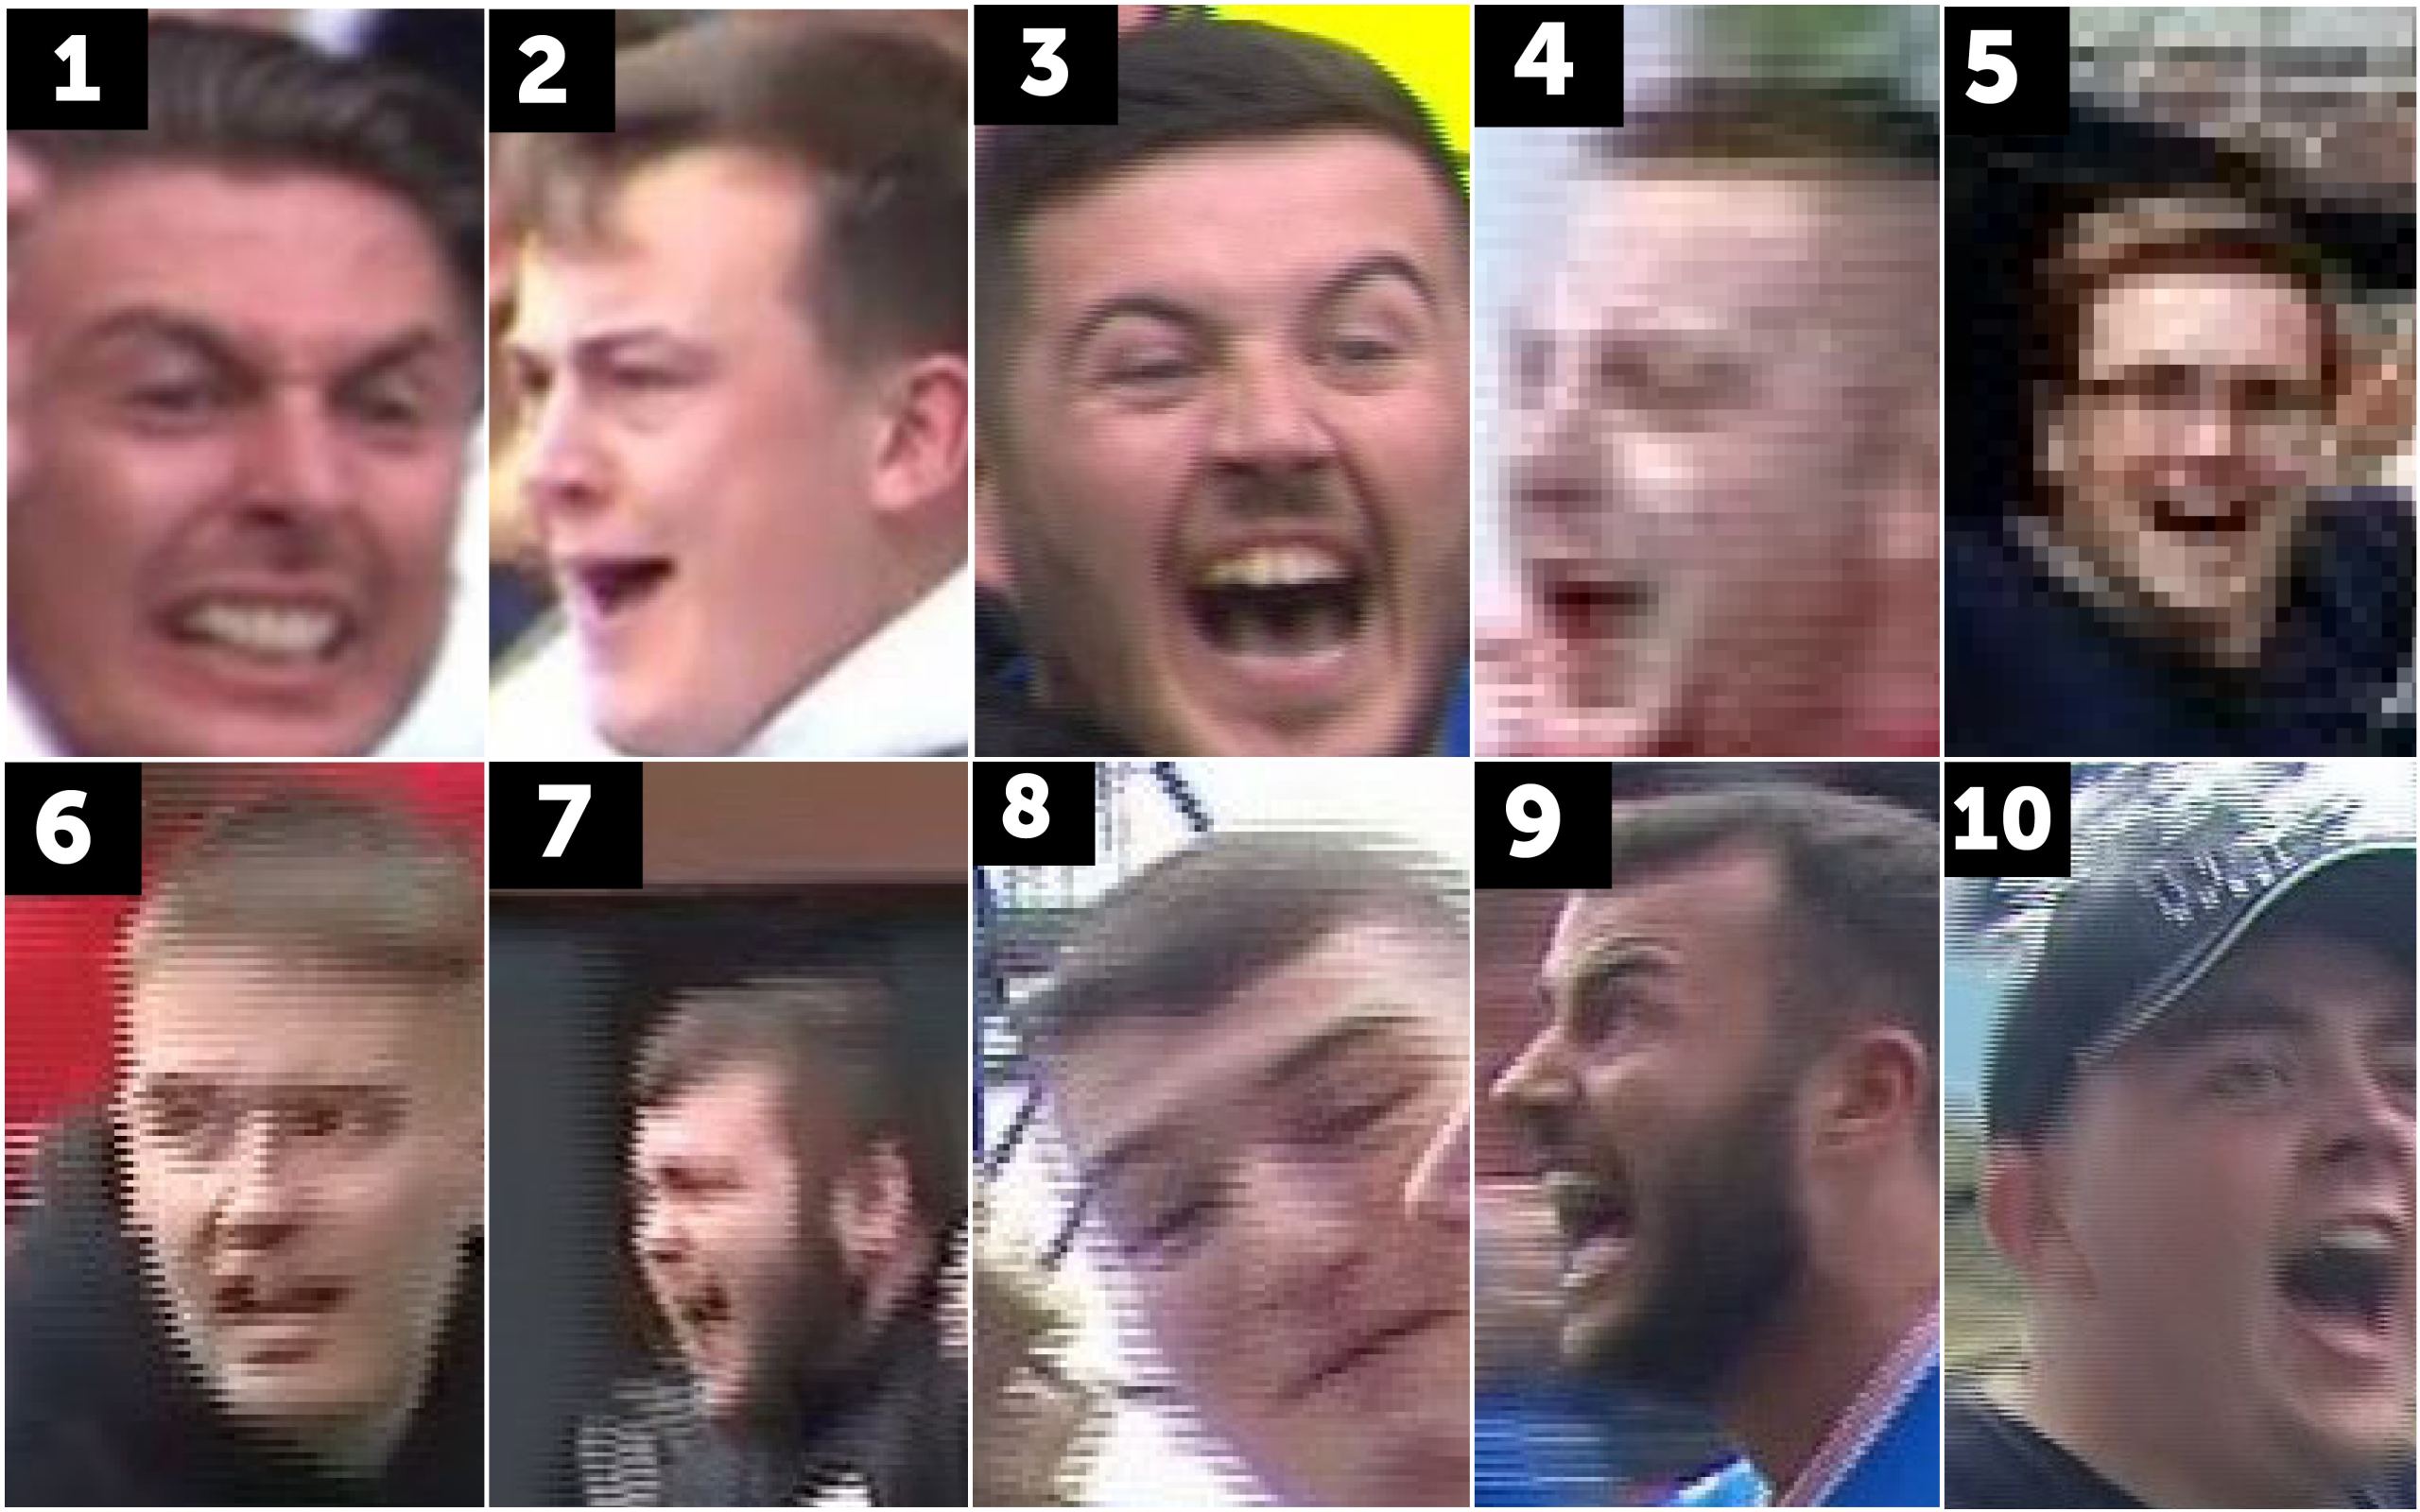 10 of 20 men police believe may be able to assist with enquiries in relation to various incidents which occurred at Rugby Park, Kilmarnock on 4 August 2019